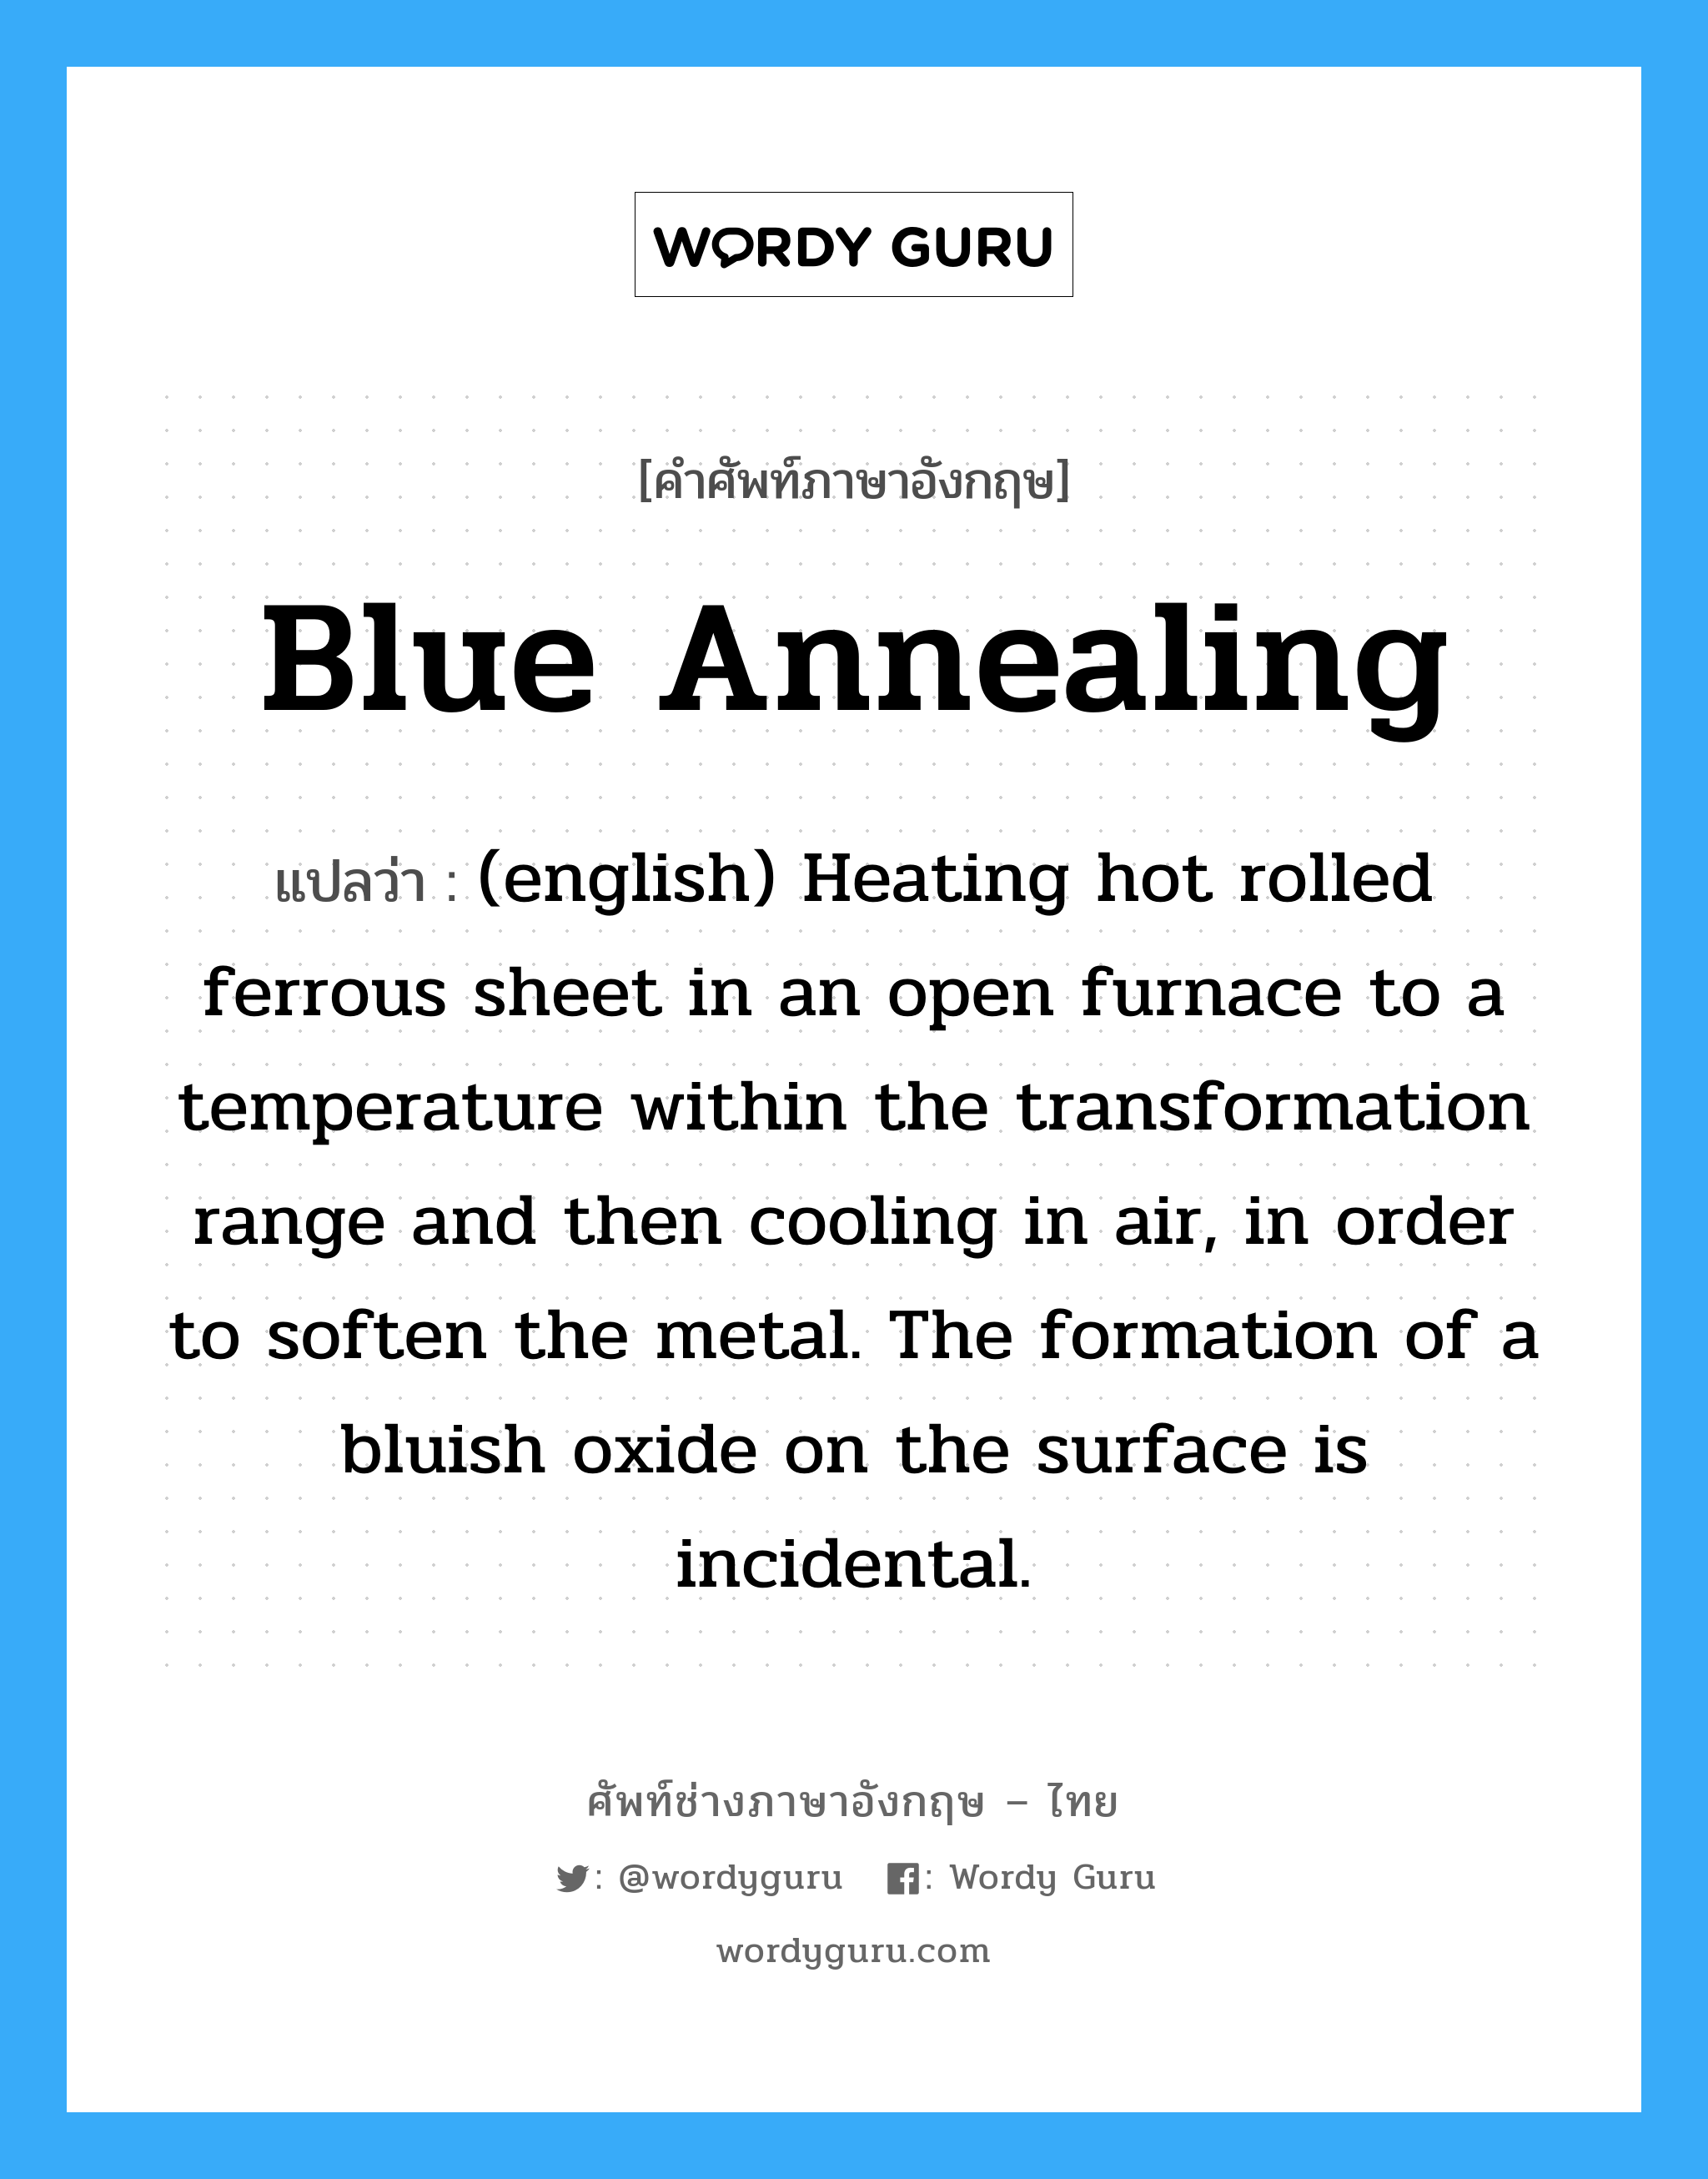 Blue Annealing แปลว่า?, คำศัพท์ช่างภาษาอังกฤษ - ไทย Blue Annealing คำศัพท์ภาษาอังกฤษ Blue Annealing แปลว่า (english) Heating hot rolled ferrous sheet in an open furnace to a temperature within the transformation range and then cooling in air, in order to soften the metal. The formation of a bluish oxide on the surface is incidental.